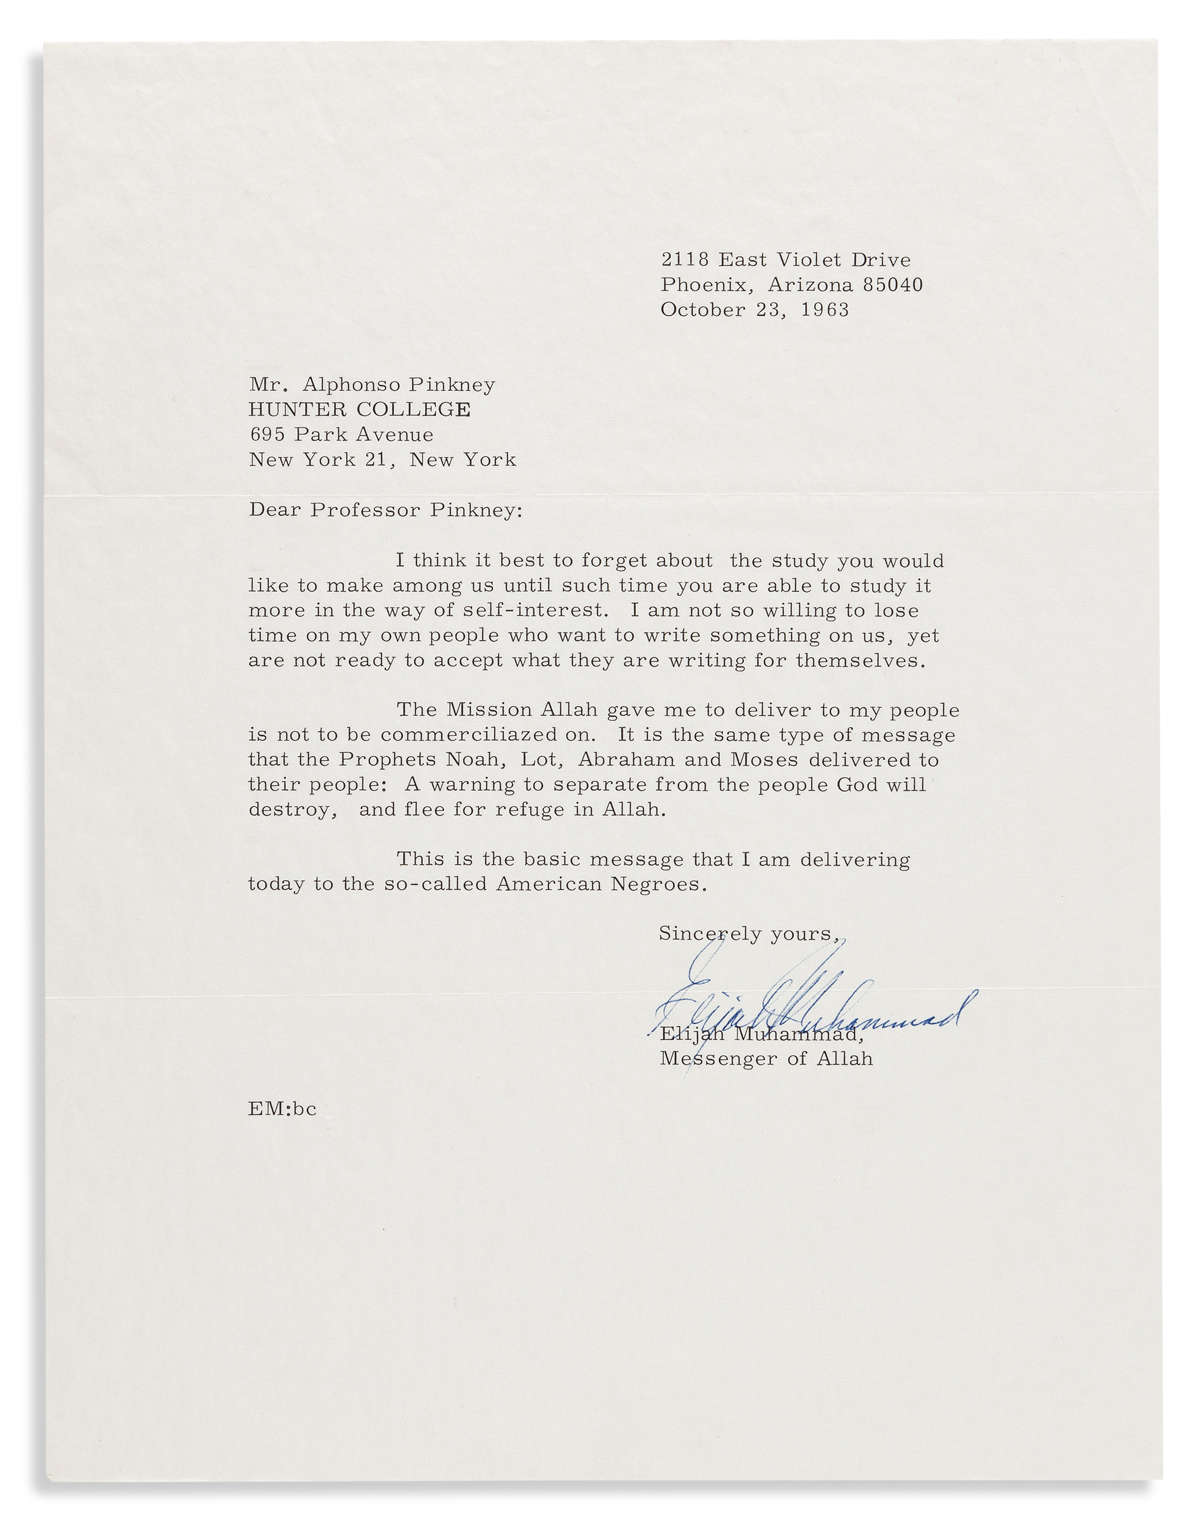 (ISLAM.) Elijah Muhammad. Letter dismissing a proposed academic study of the Nation of Islam.